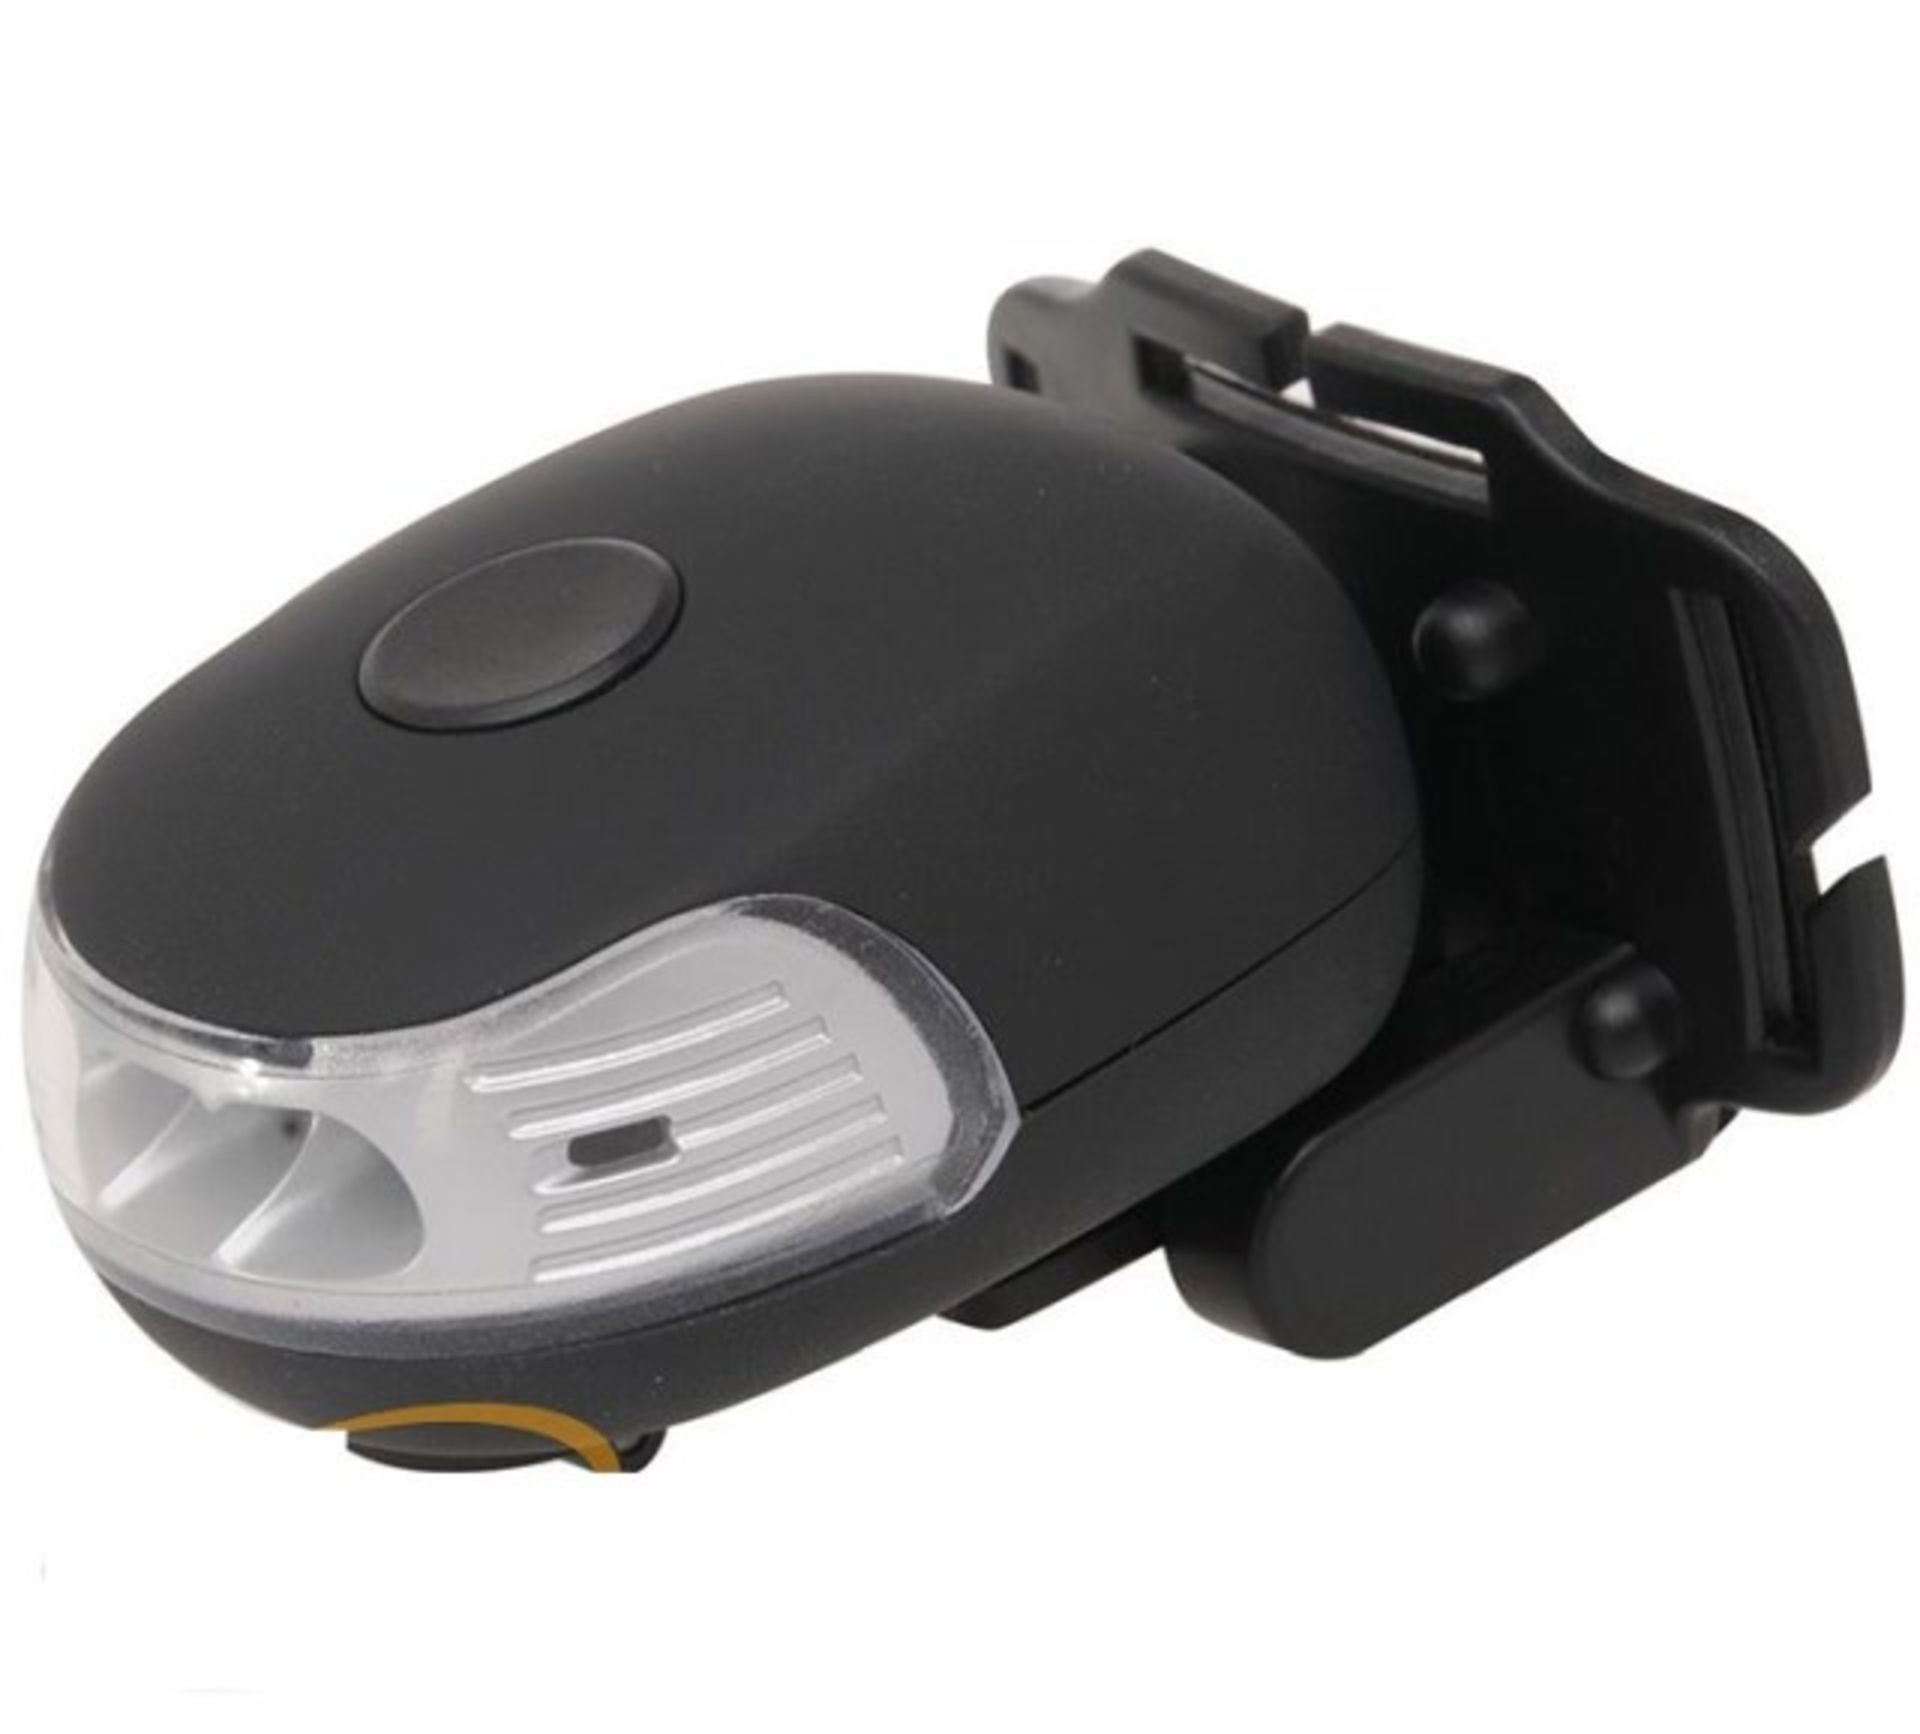 V *TRADE QTY* Brand New Tritronic Optrimax Wind-Up Head Lamp X 5 YOUR BID PRICE TO BE MULTIPLIED